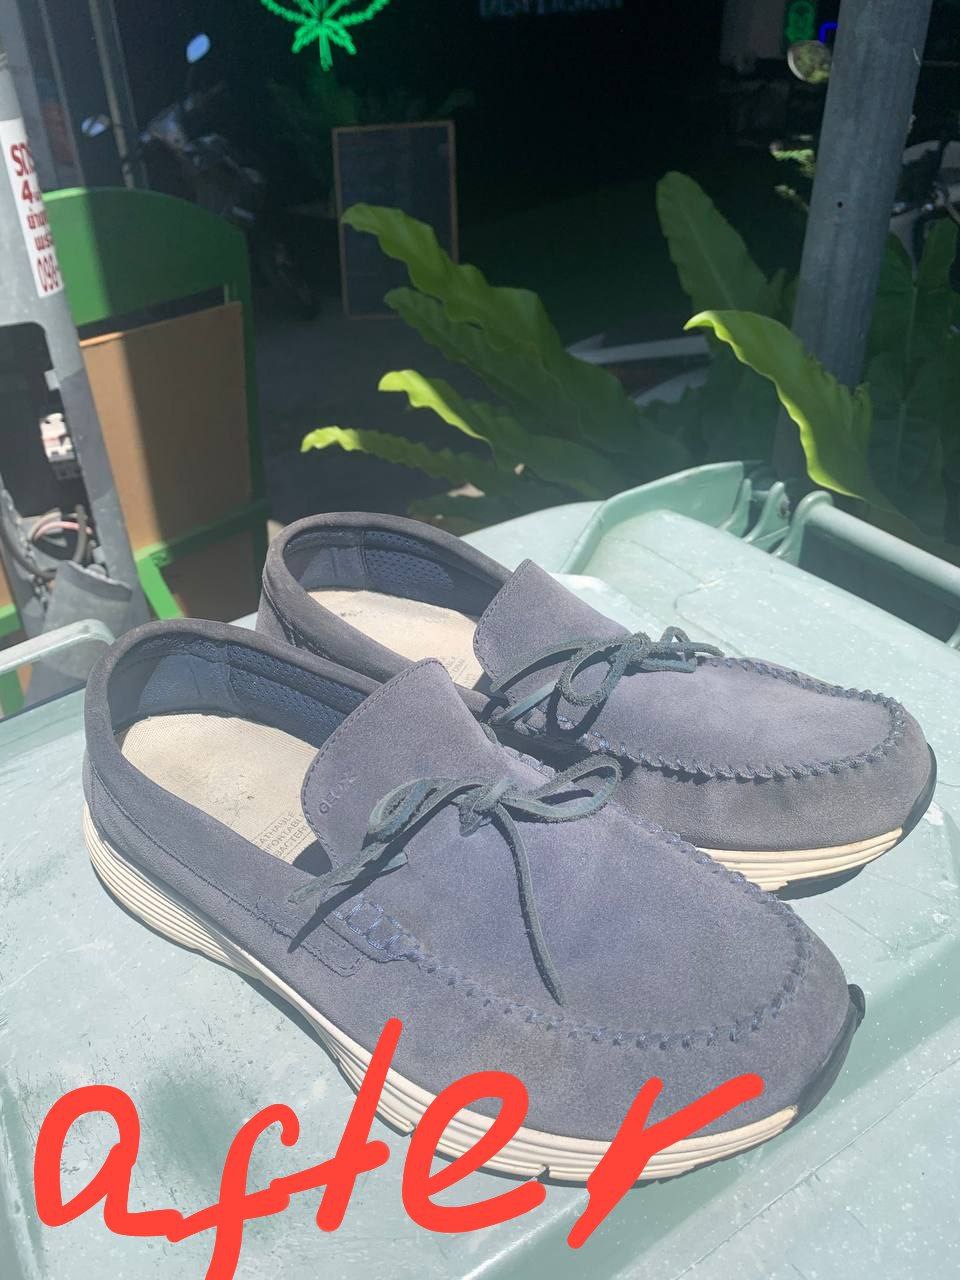 Suede loafersdry — cleaning of shoes